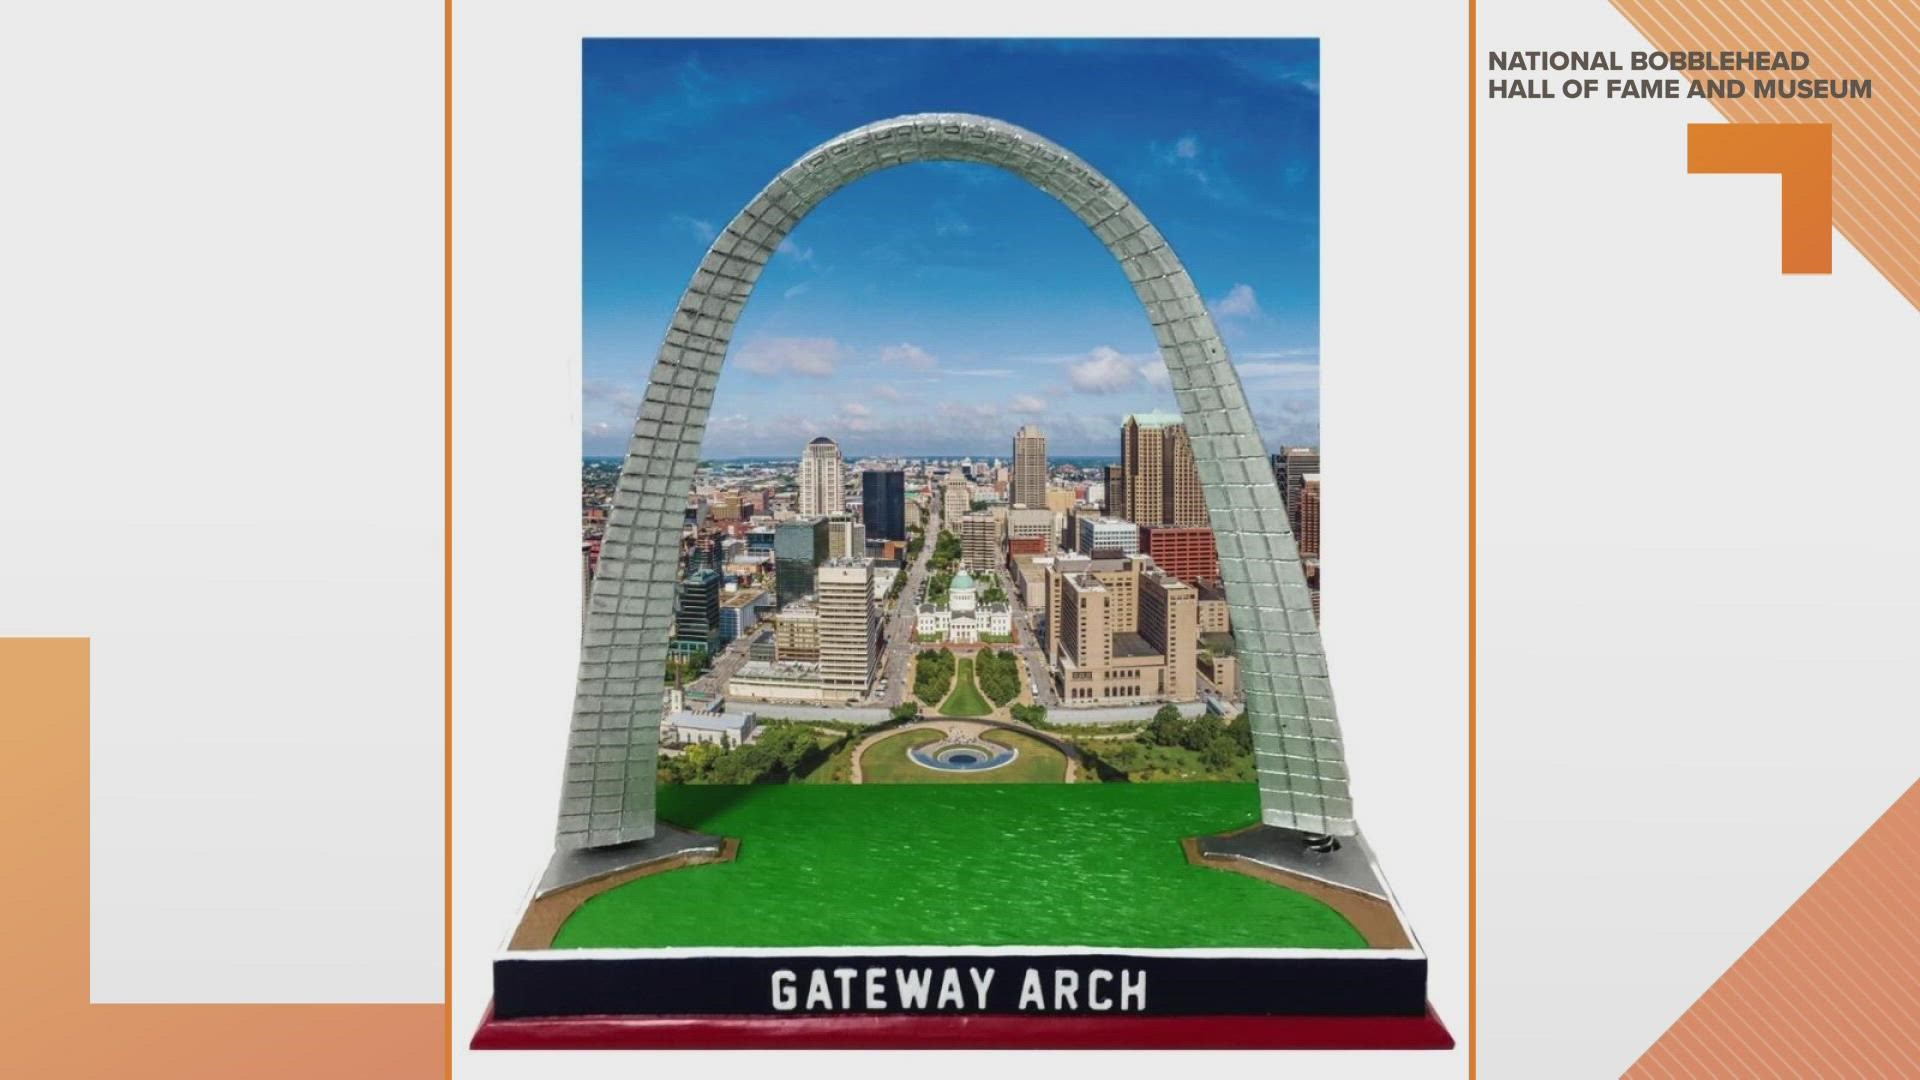 Score yourself a Gateway Arch bobblehead to celebrate the monument's 57th birthday. The structure was completed on Oct. 28, 1965.